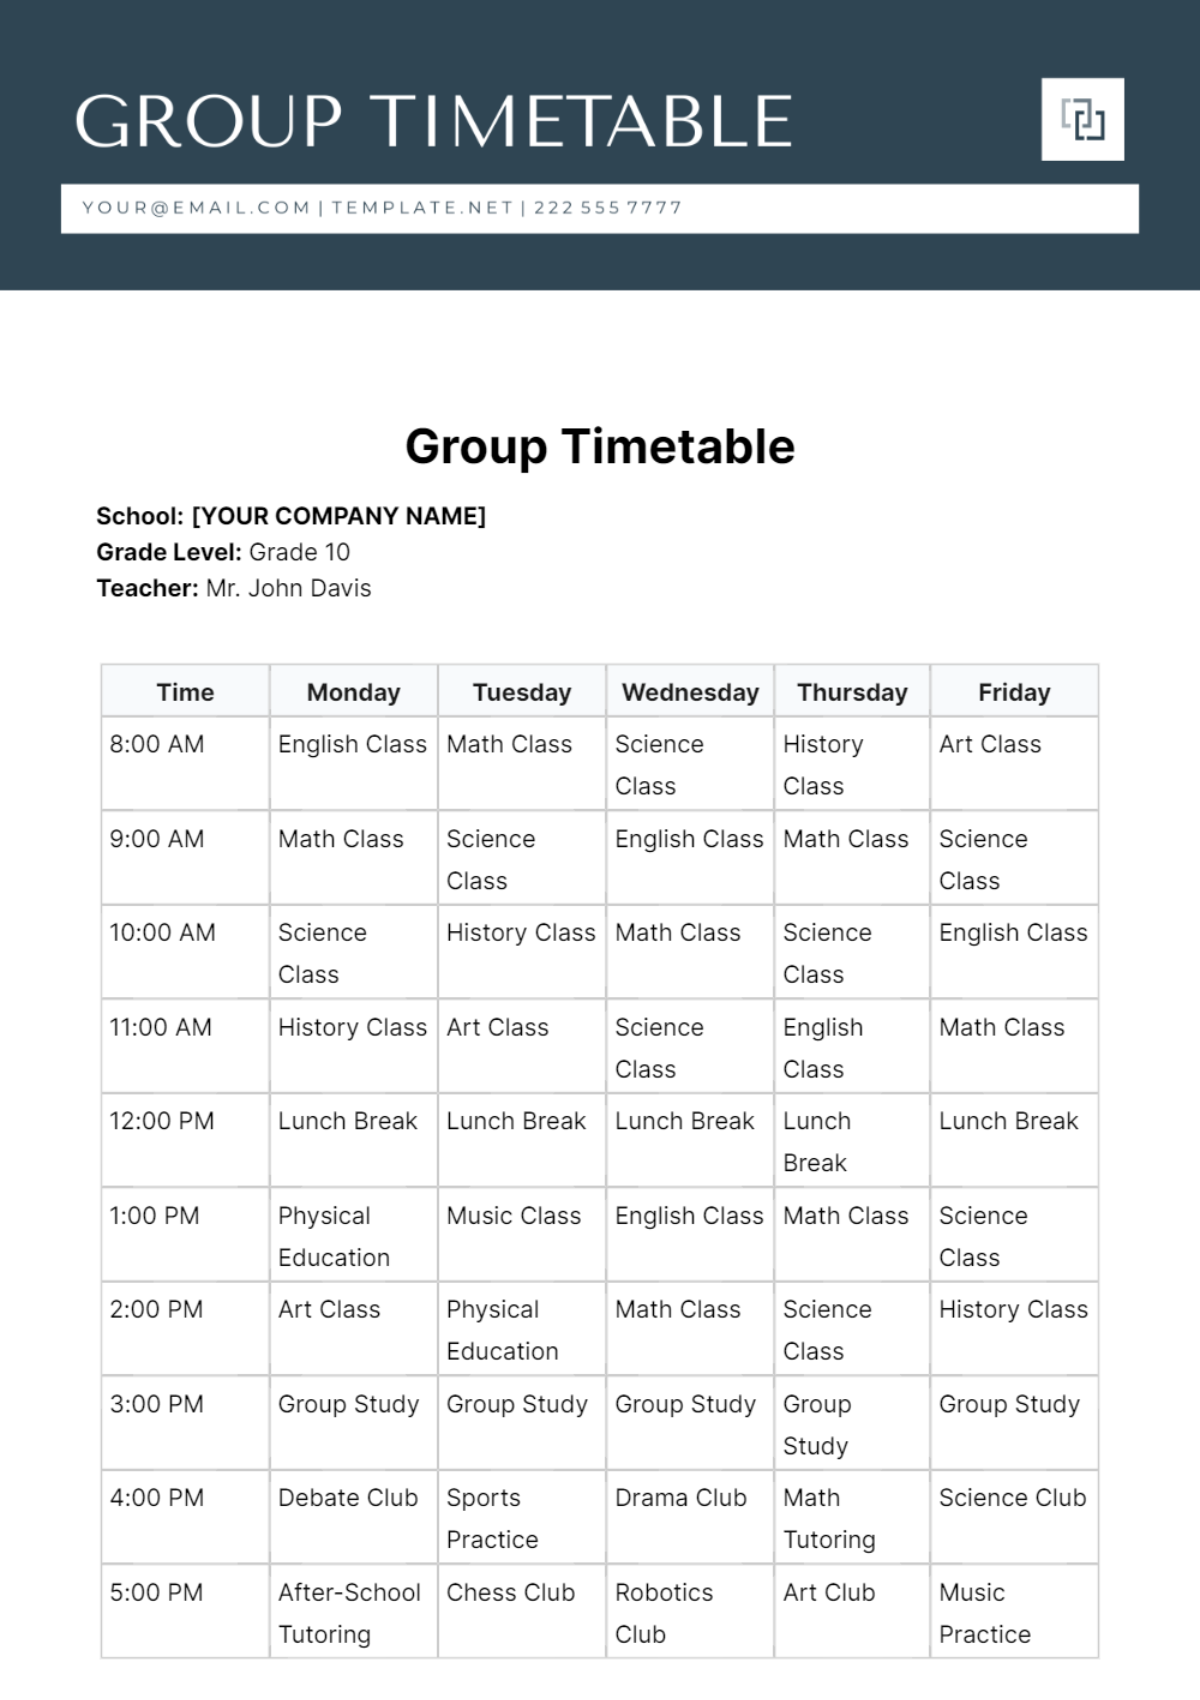 Free Group Timetable Template